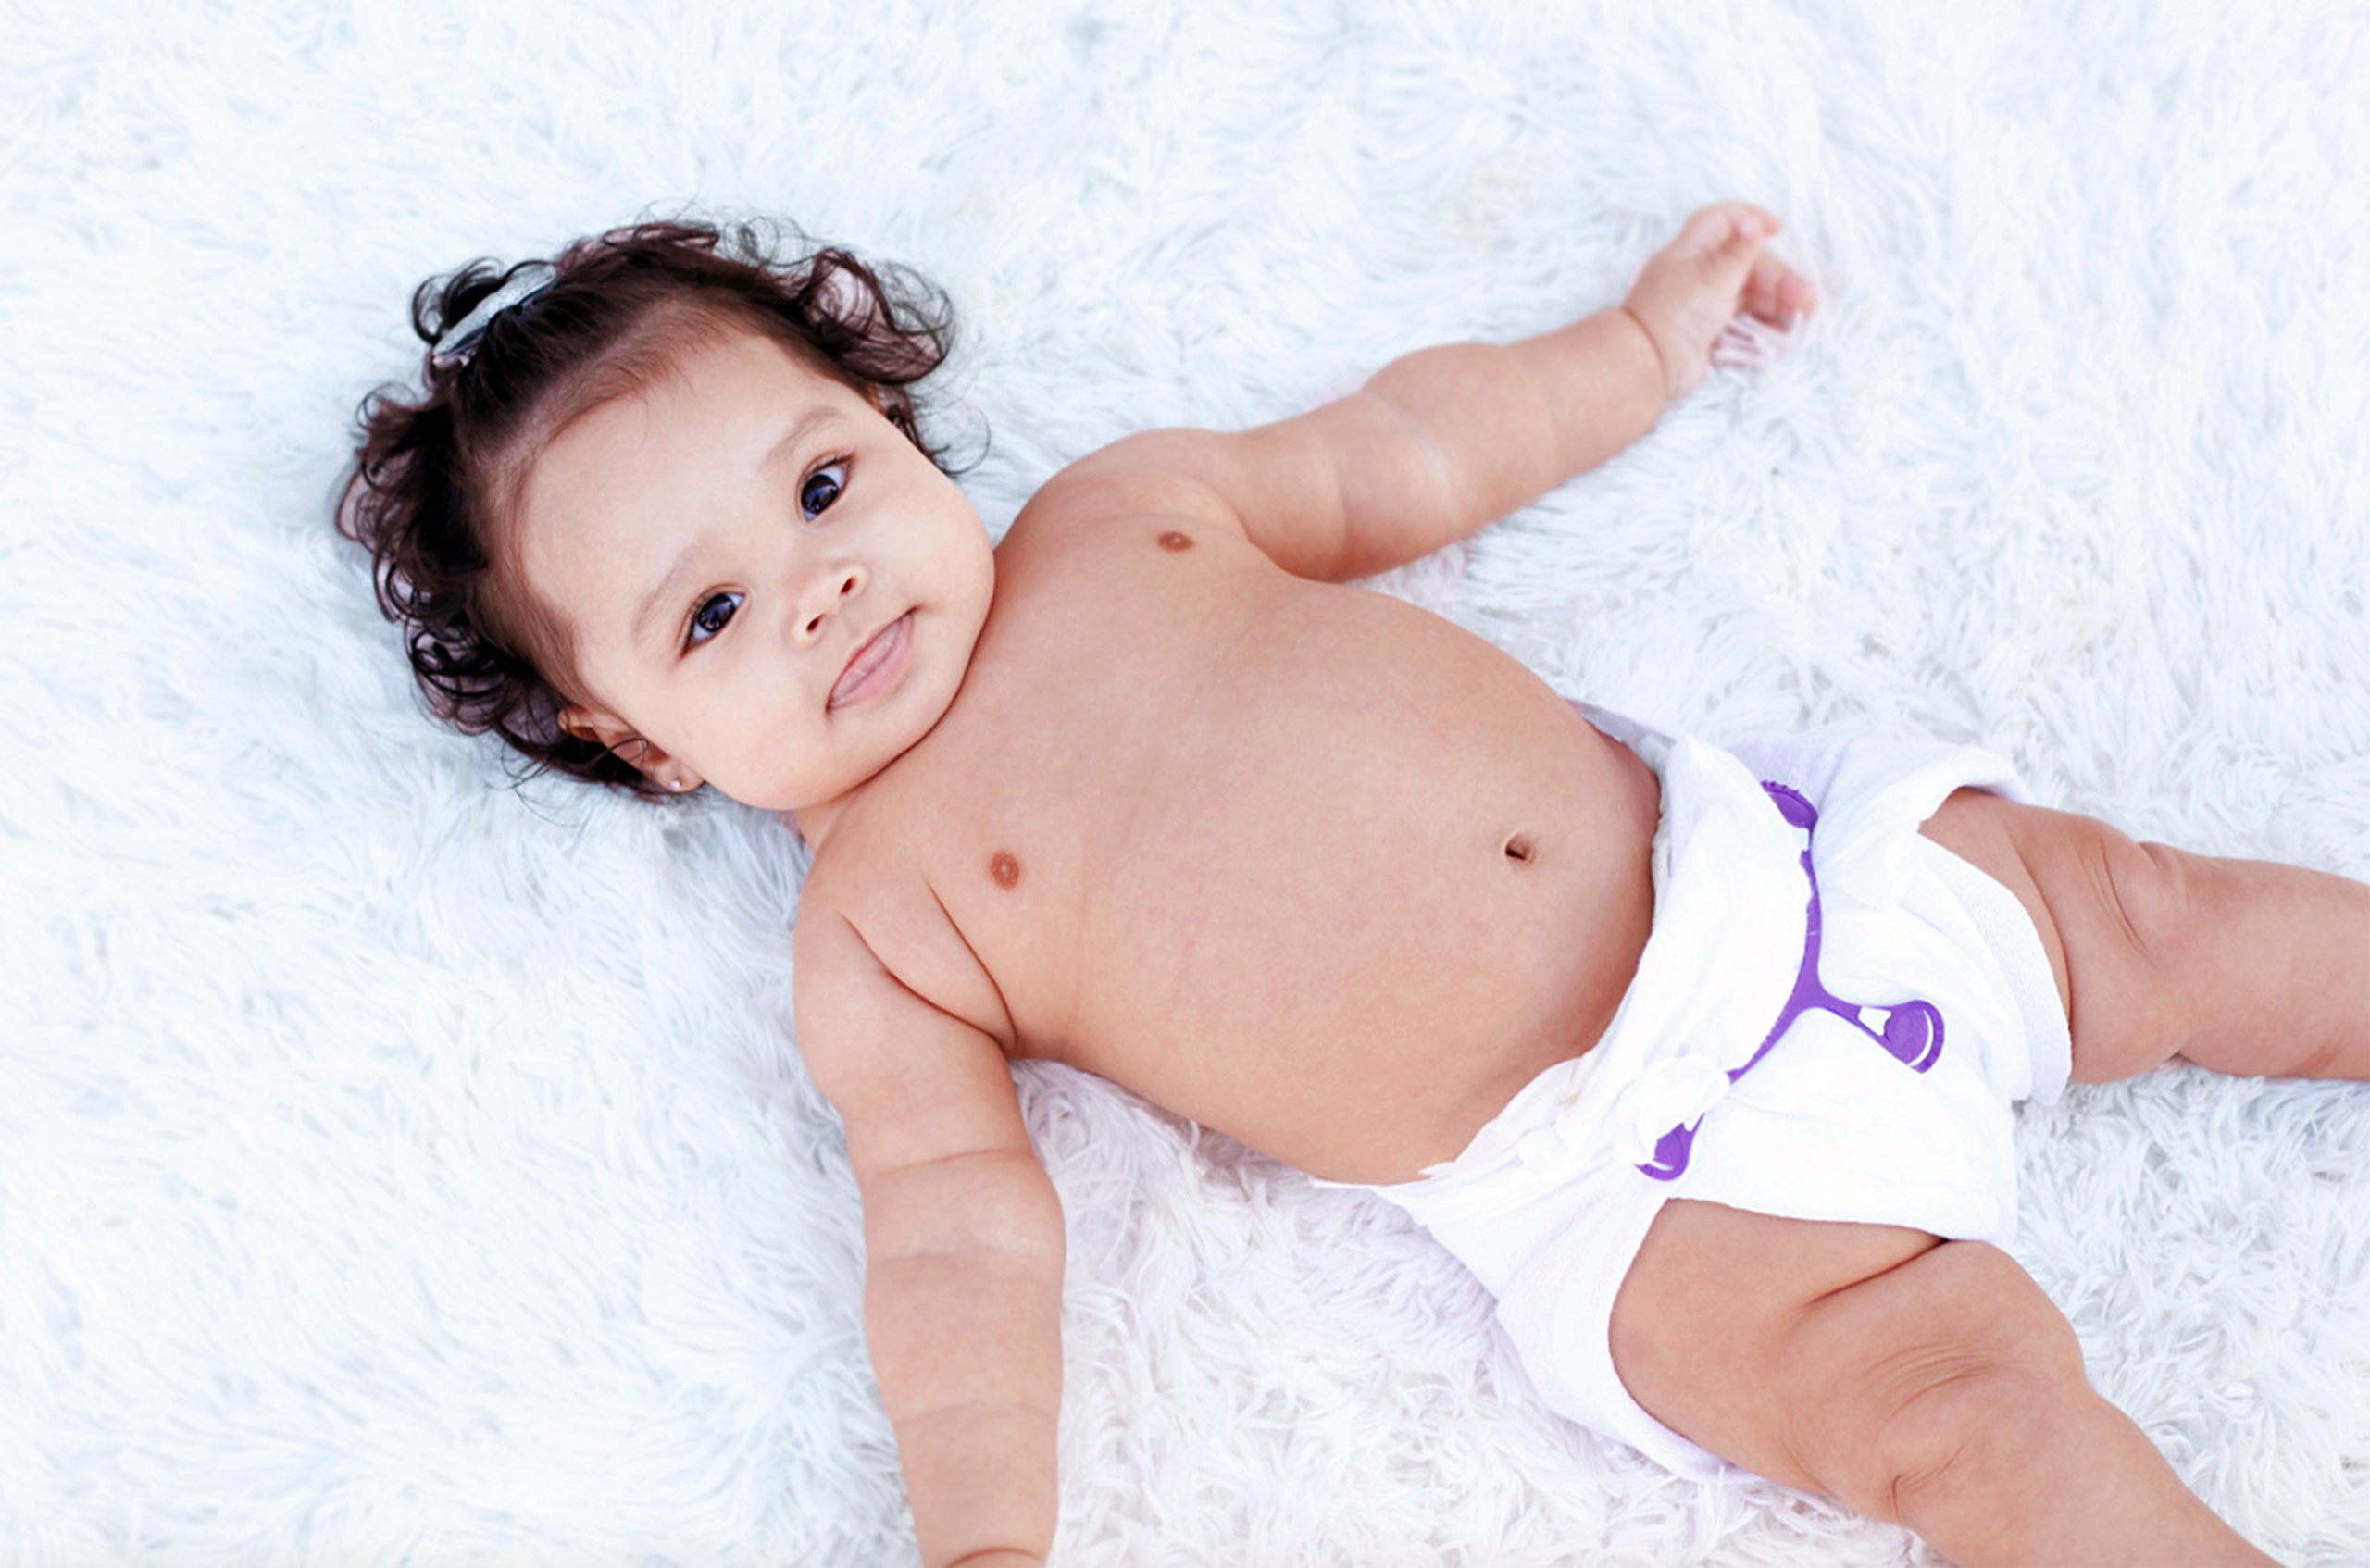 Types of Diapers: Cloth Diapers vs Disposable Diapers